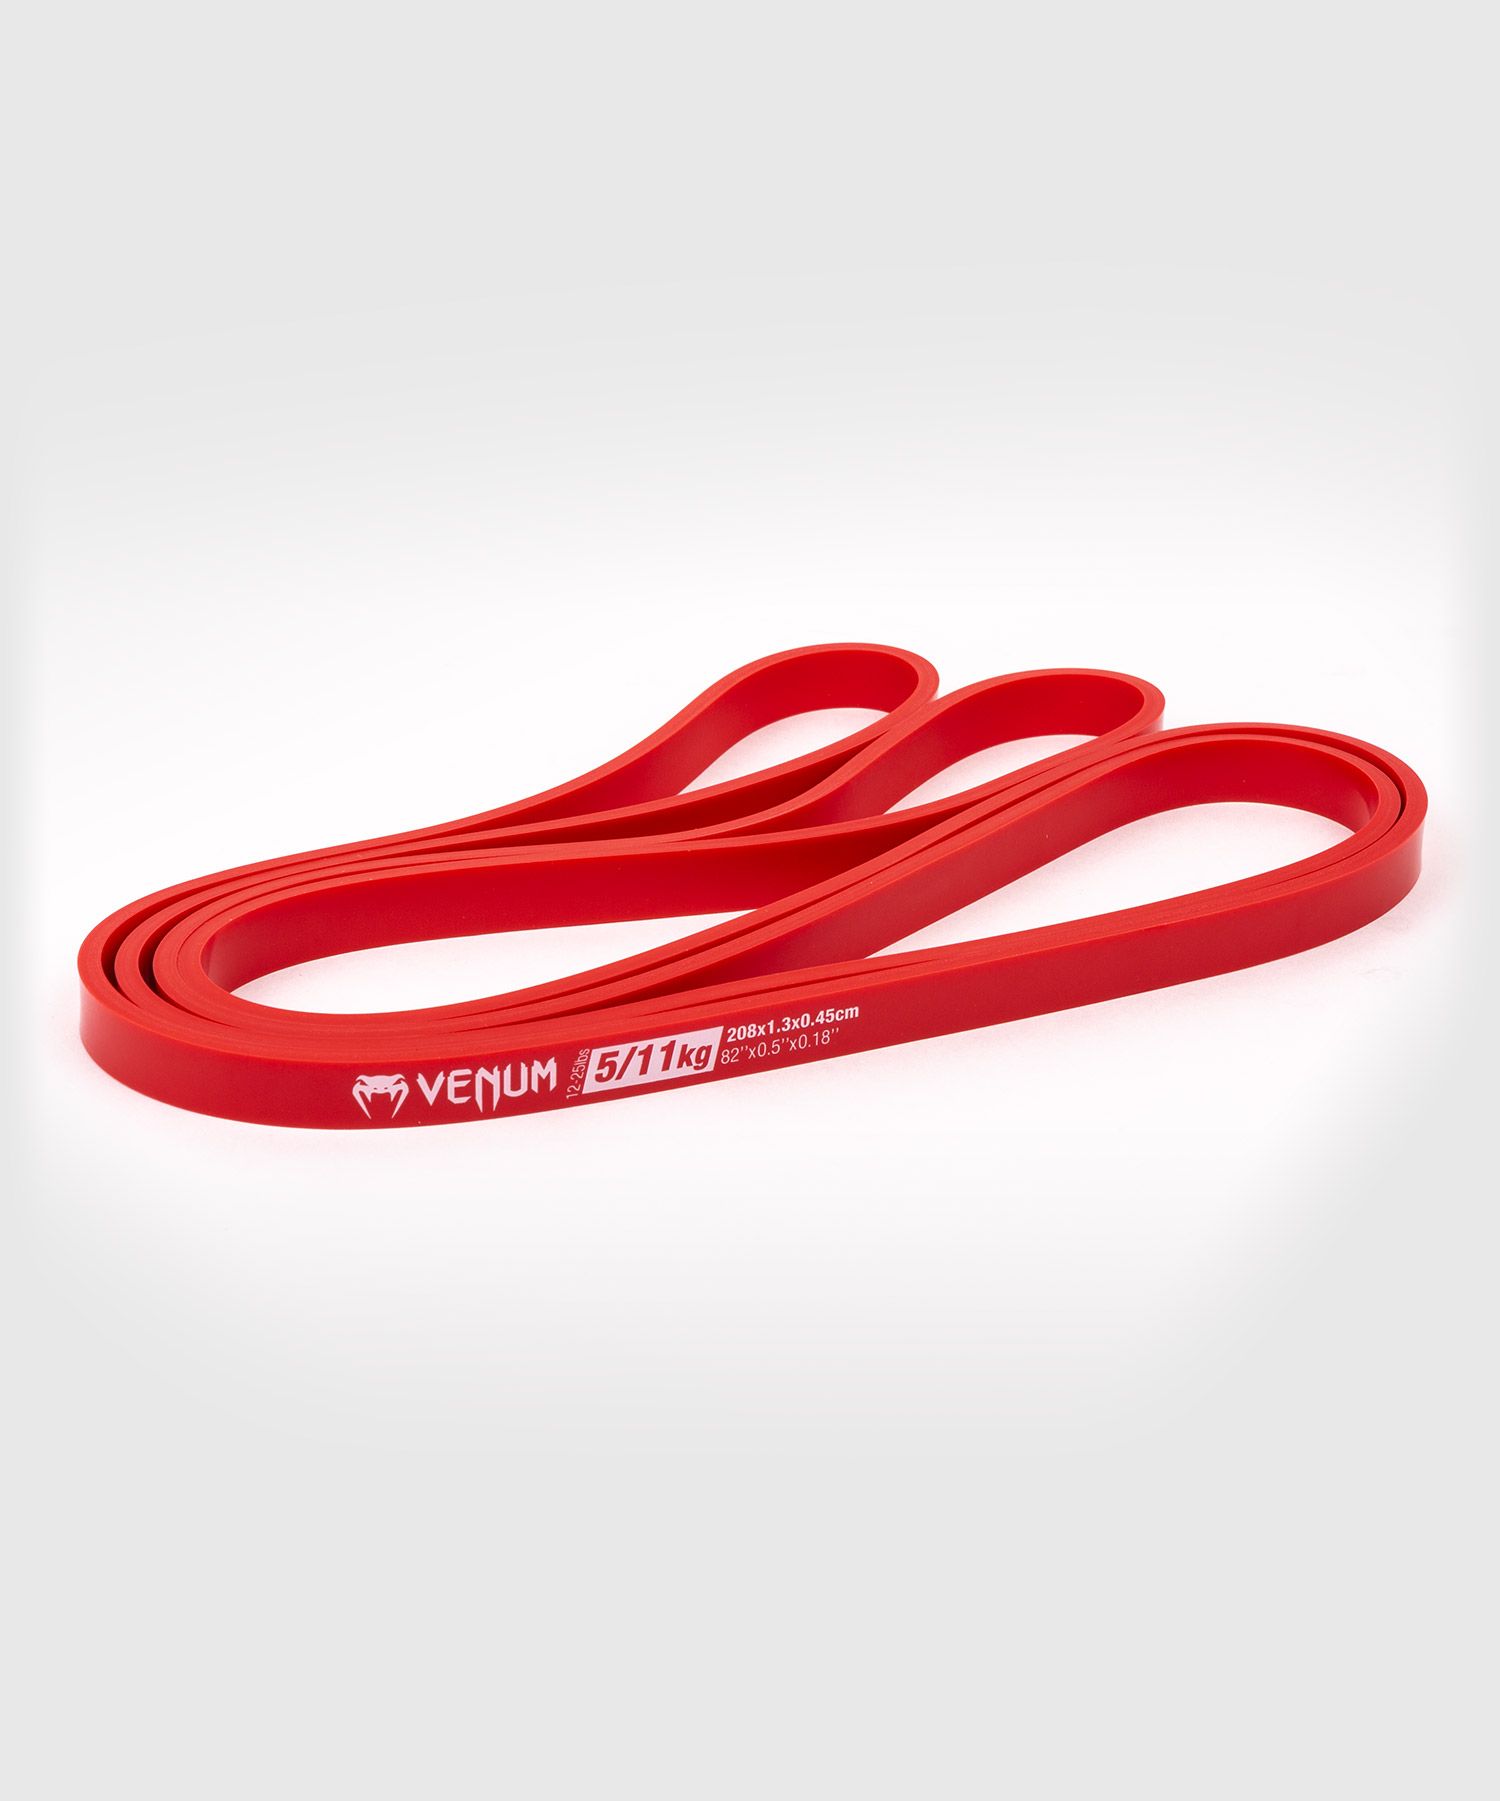 Venum Challenger Resistance band - Red - 12-25lbs